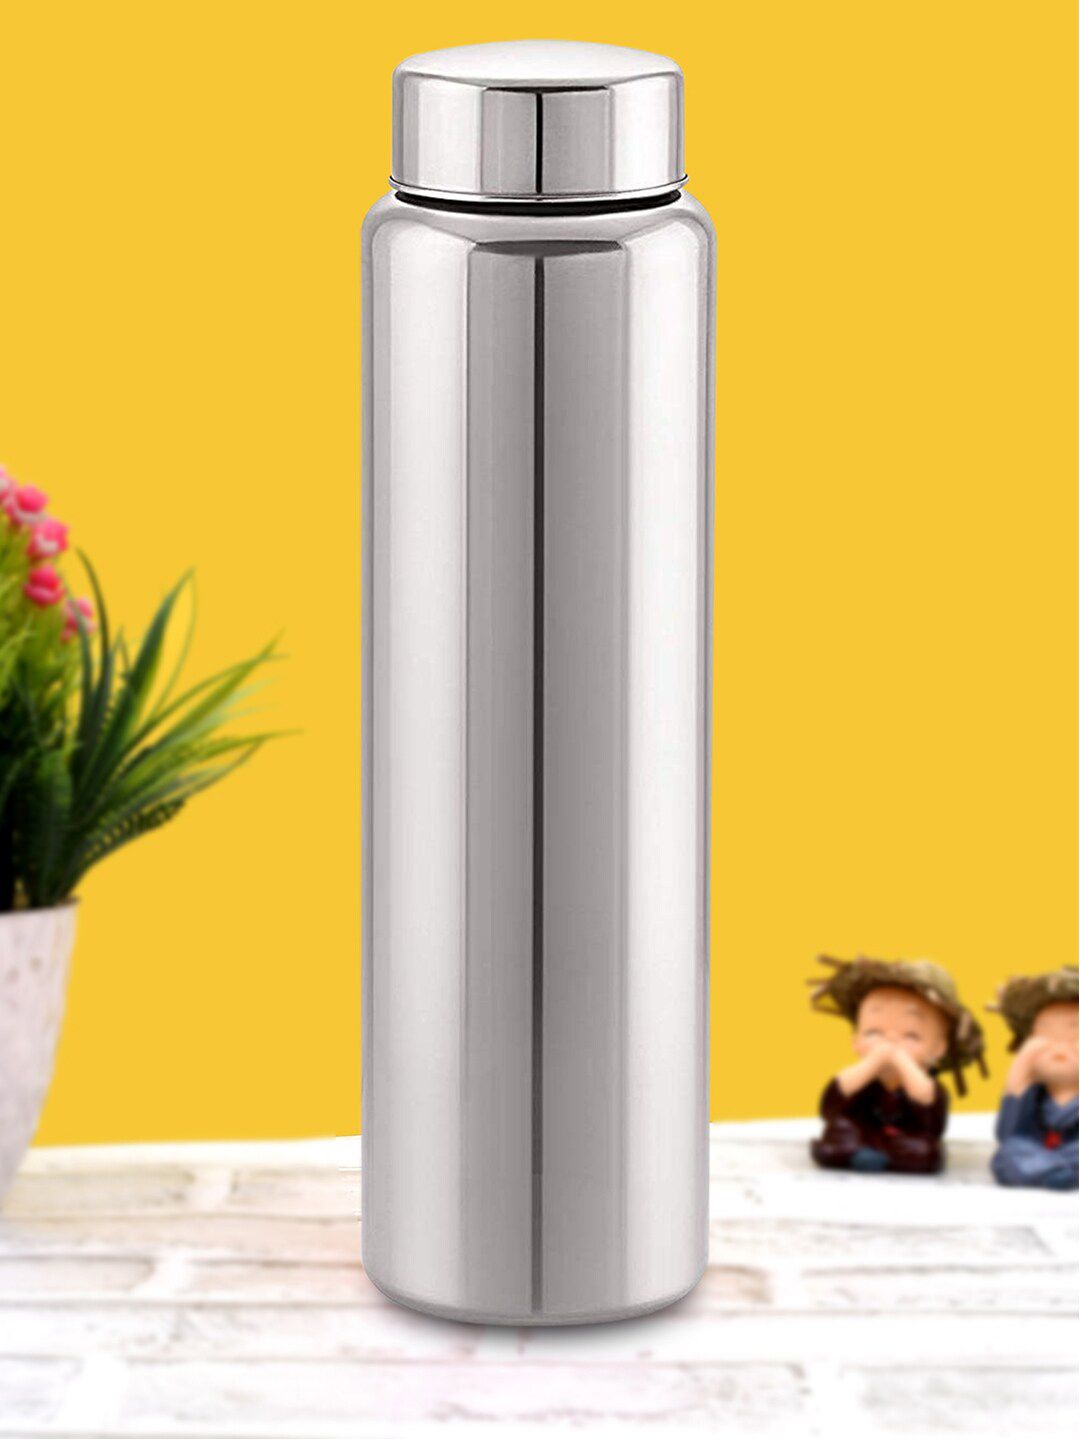 Kuber Industries Unisex Silver-Toned Stainless Steel Refrigerator Bottle 1000 ml Price in India